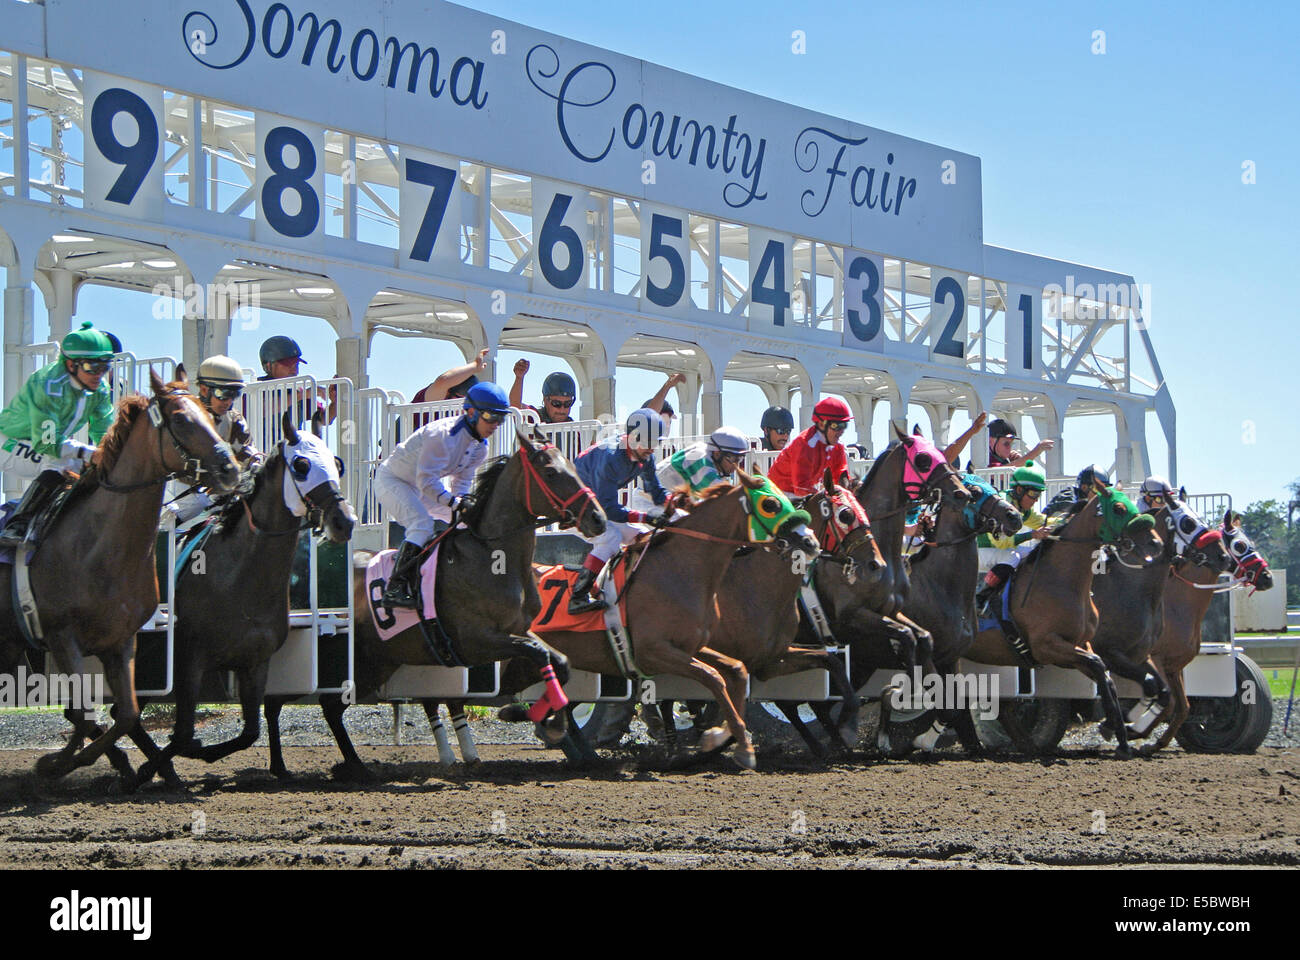 Santa Rosa, California, USA. 26th July, 2014. Thourbread horses break from the starting gate in the 5th race of the Sonoma County fair on Saturlday. Credit:  Bob Kreisel/Alamy Live News Stock Photo